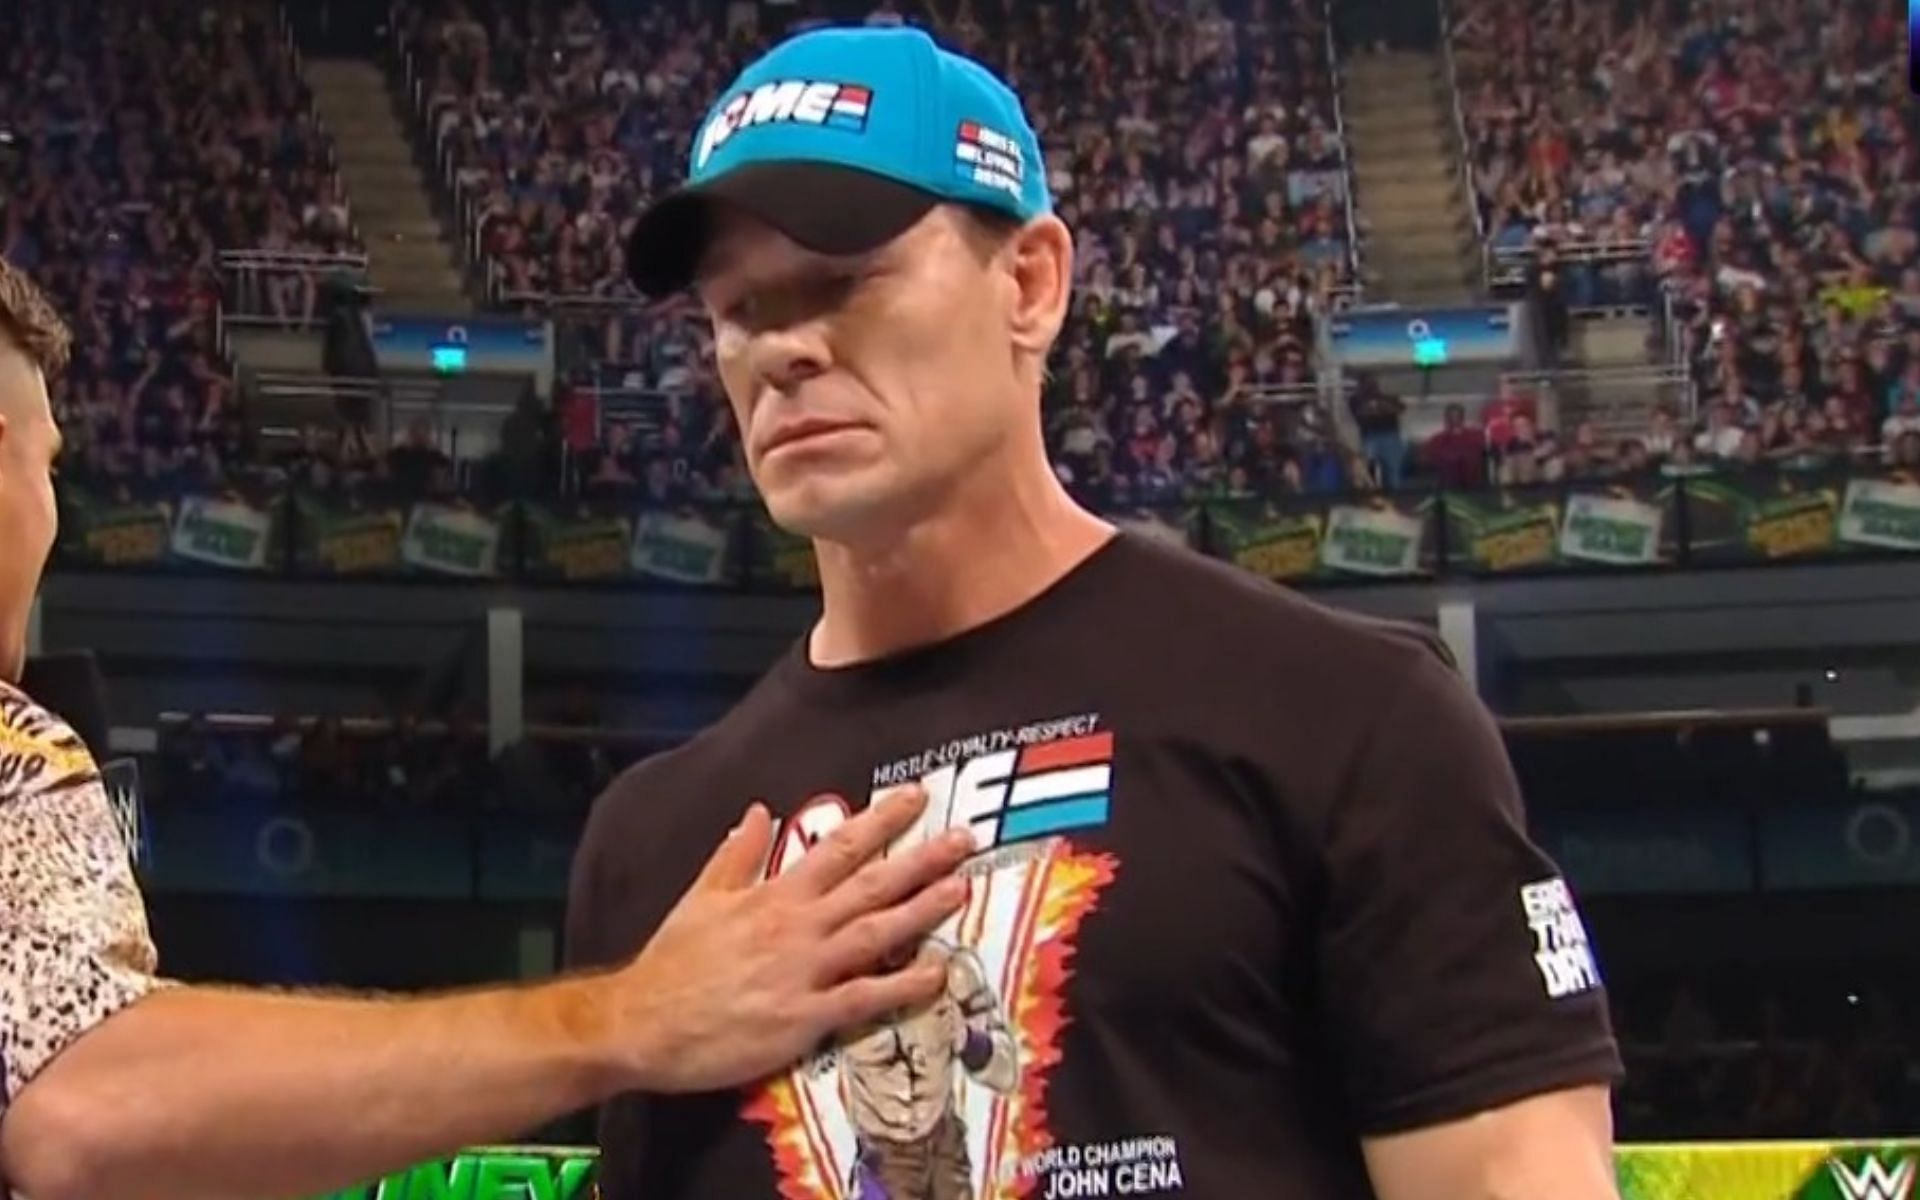 Cena has a surprising new number one fan